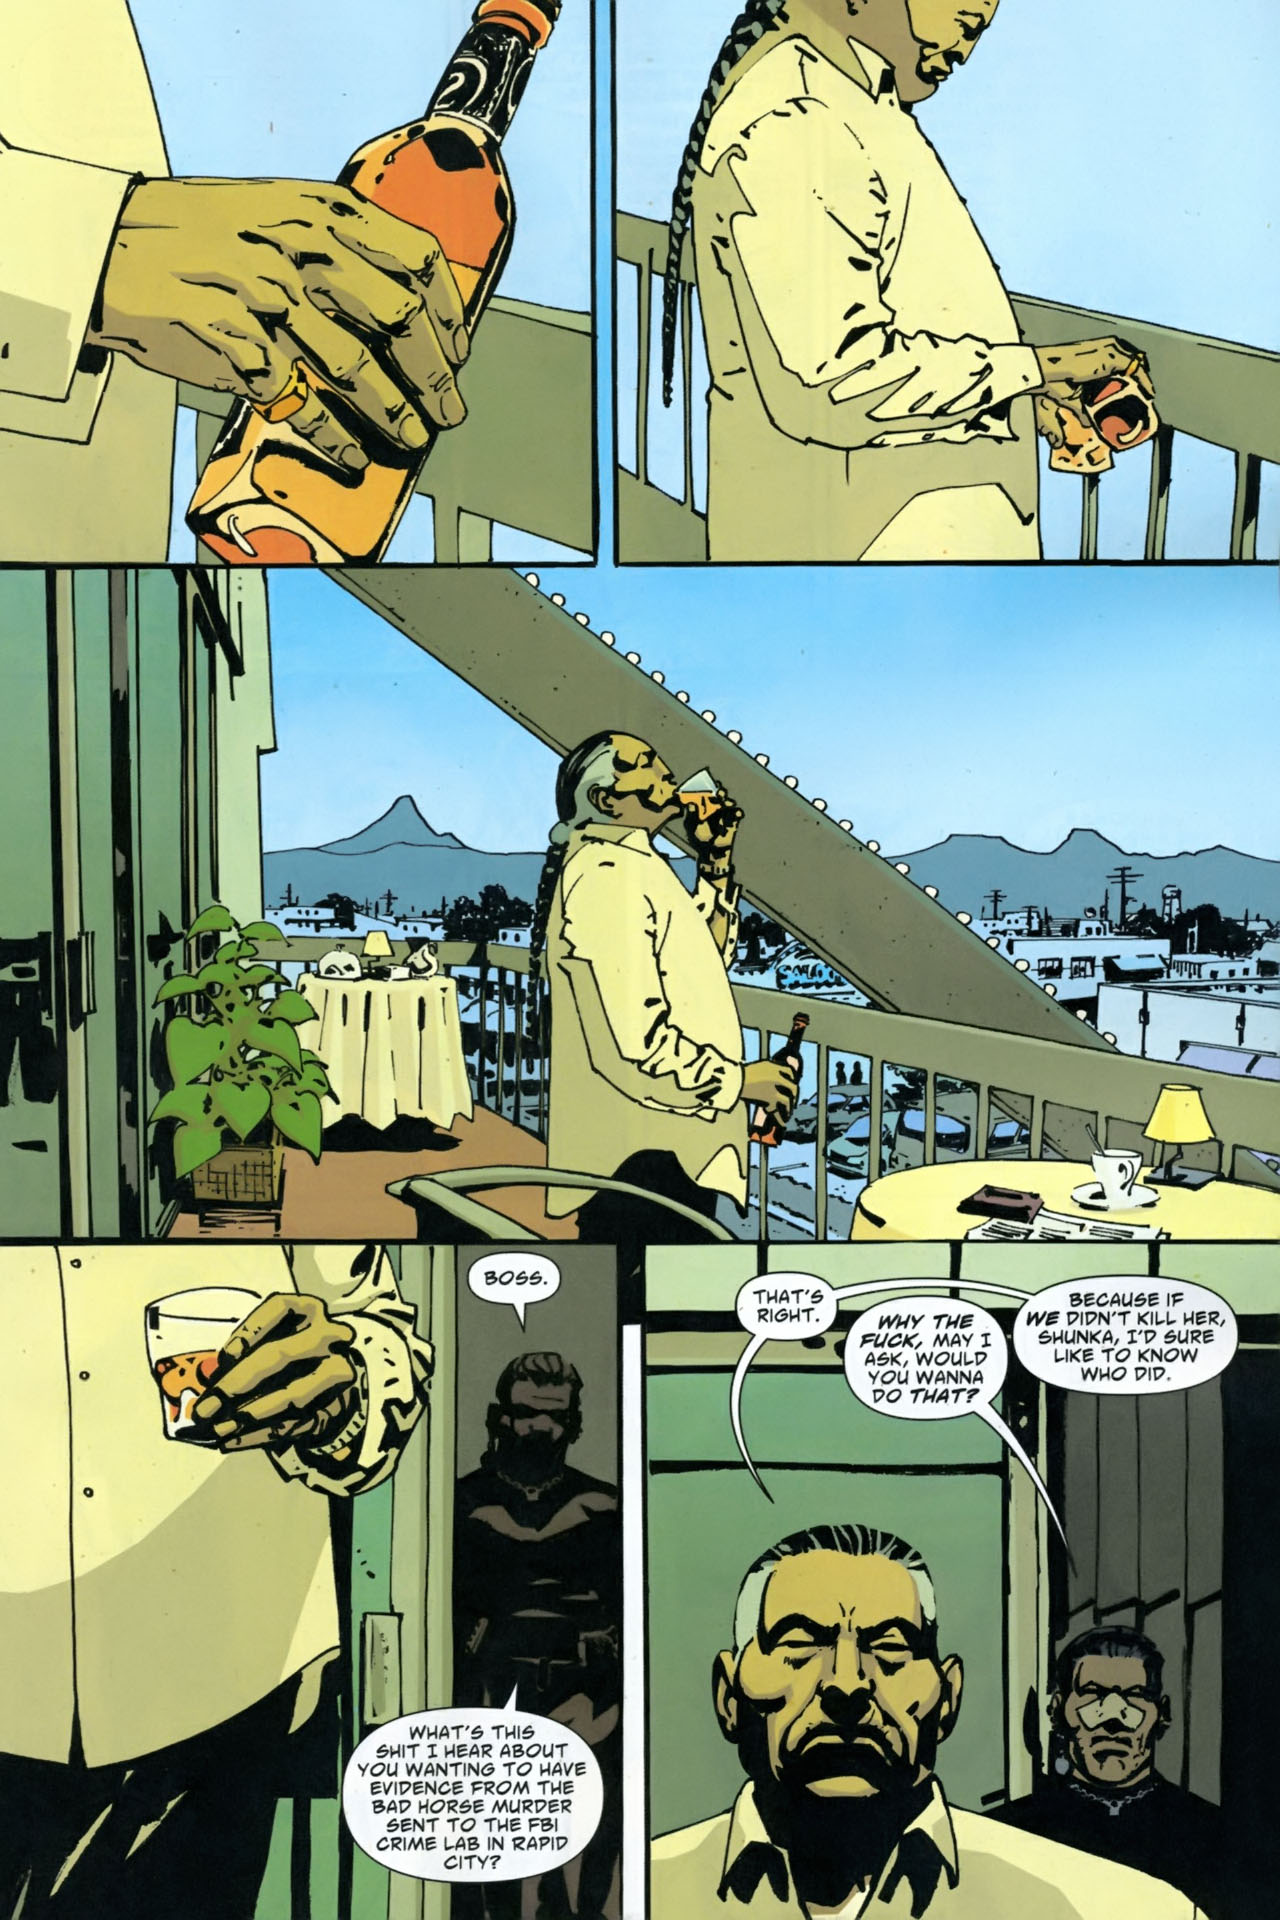 Scalped #15 - Dead Mothers, Part 3 of 5 